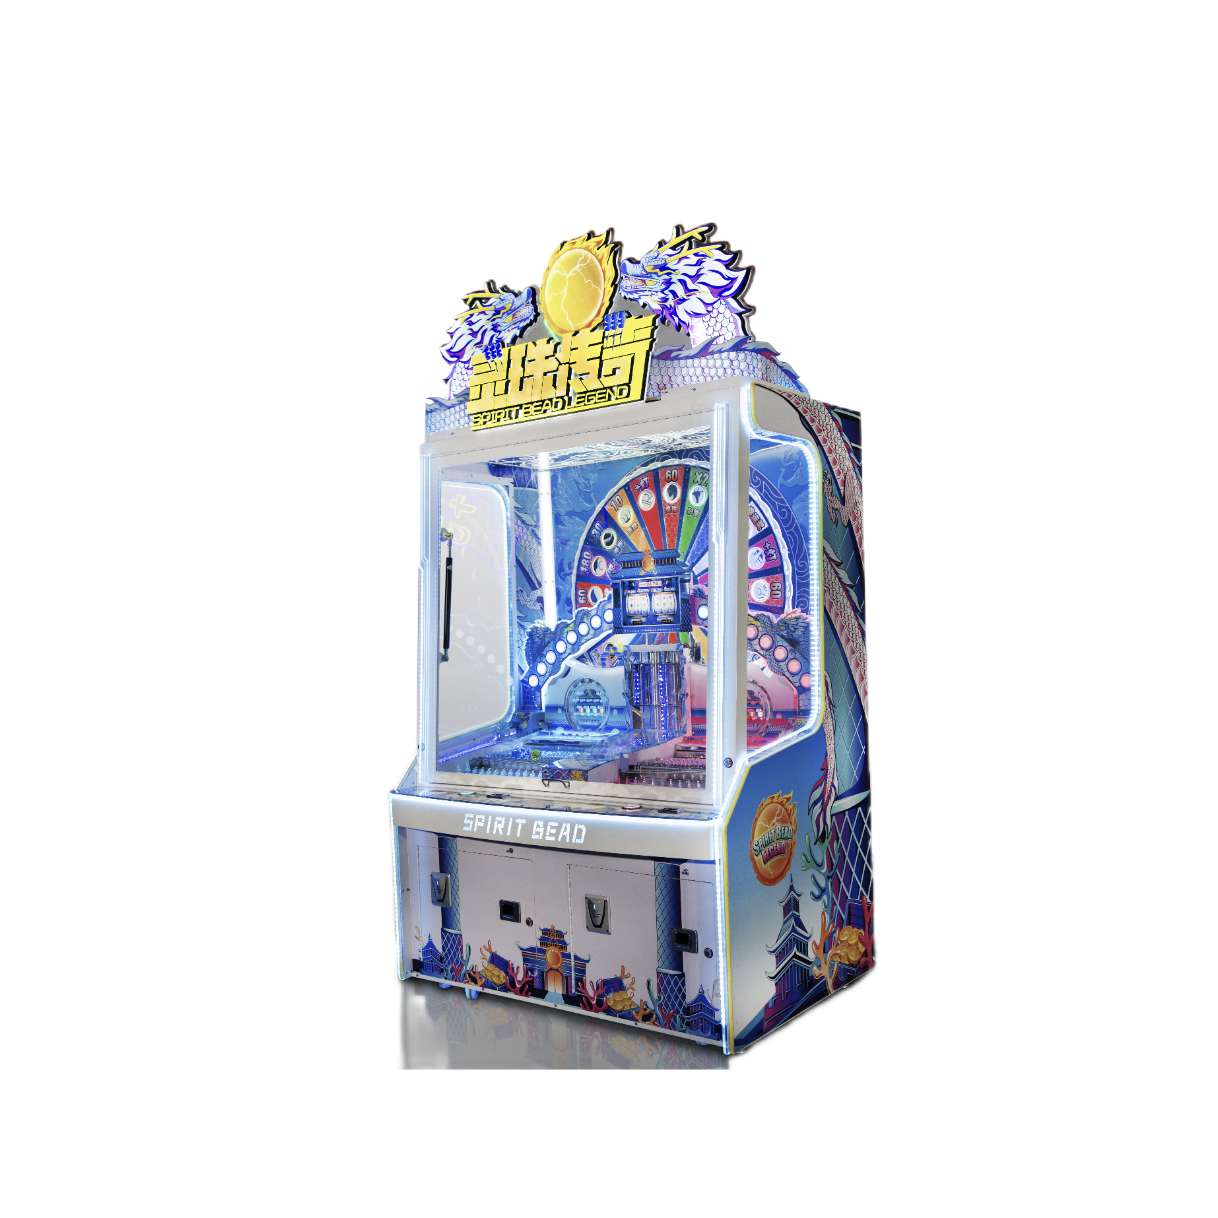 Most Popular Coin Slide Game Machine For Sale Made In China.